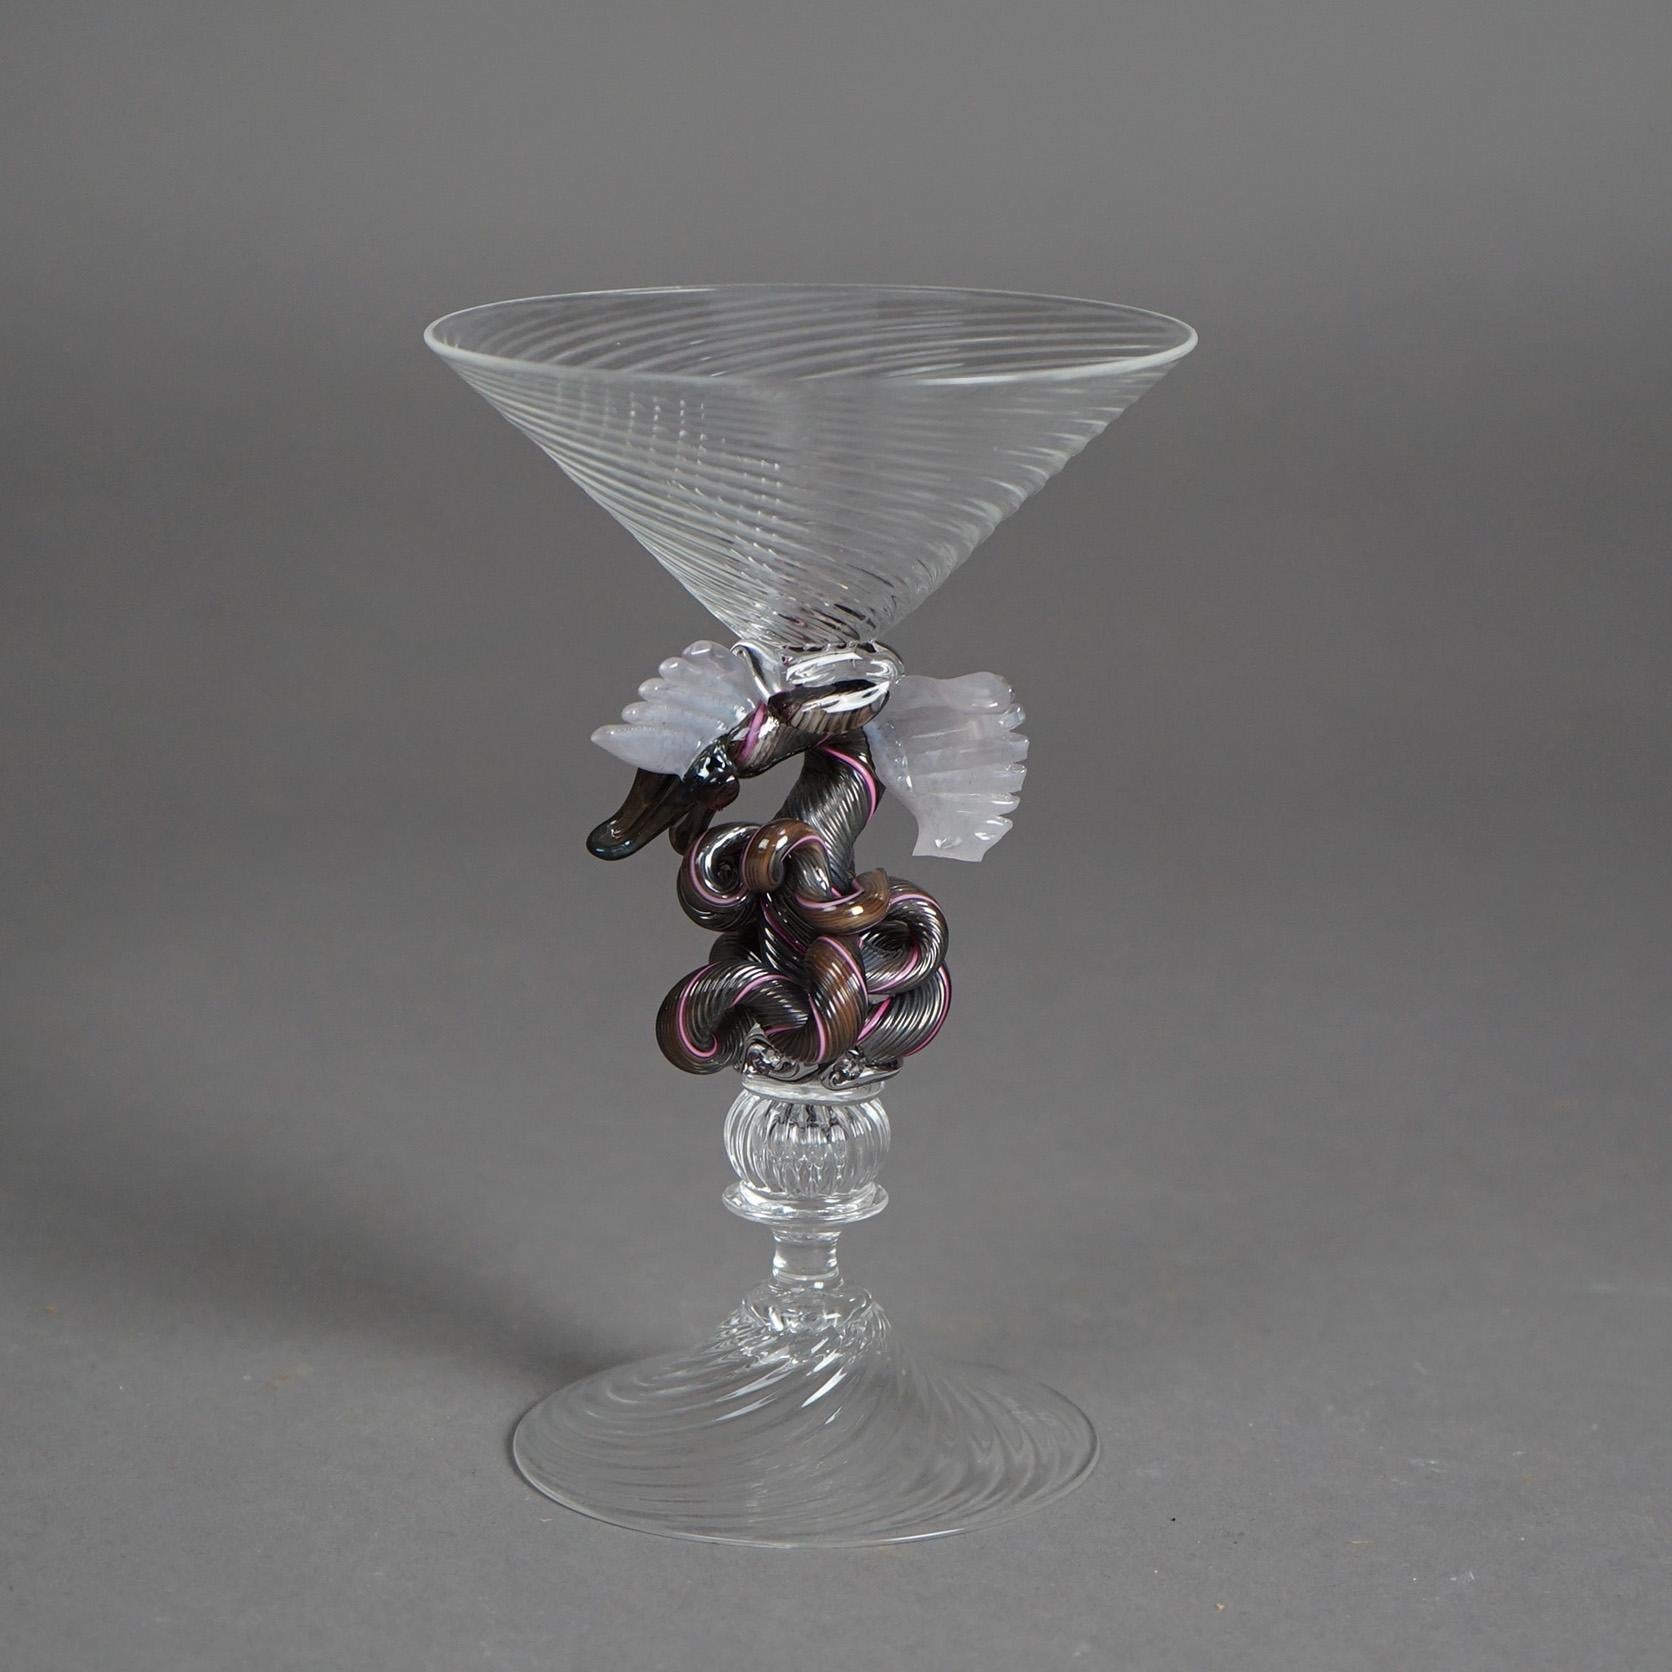 A figural Venetian style goblet by William Gudenrath offers art glass construction with flared cup over dragon pedestal, artist signed on base, 20th C

Measures - 6.75